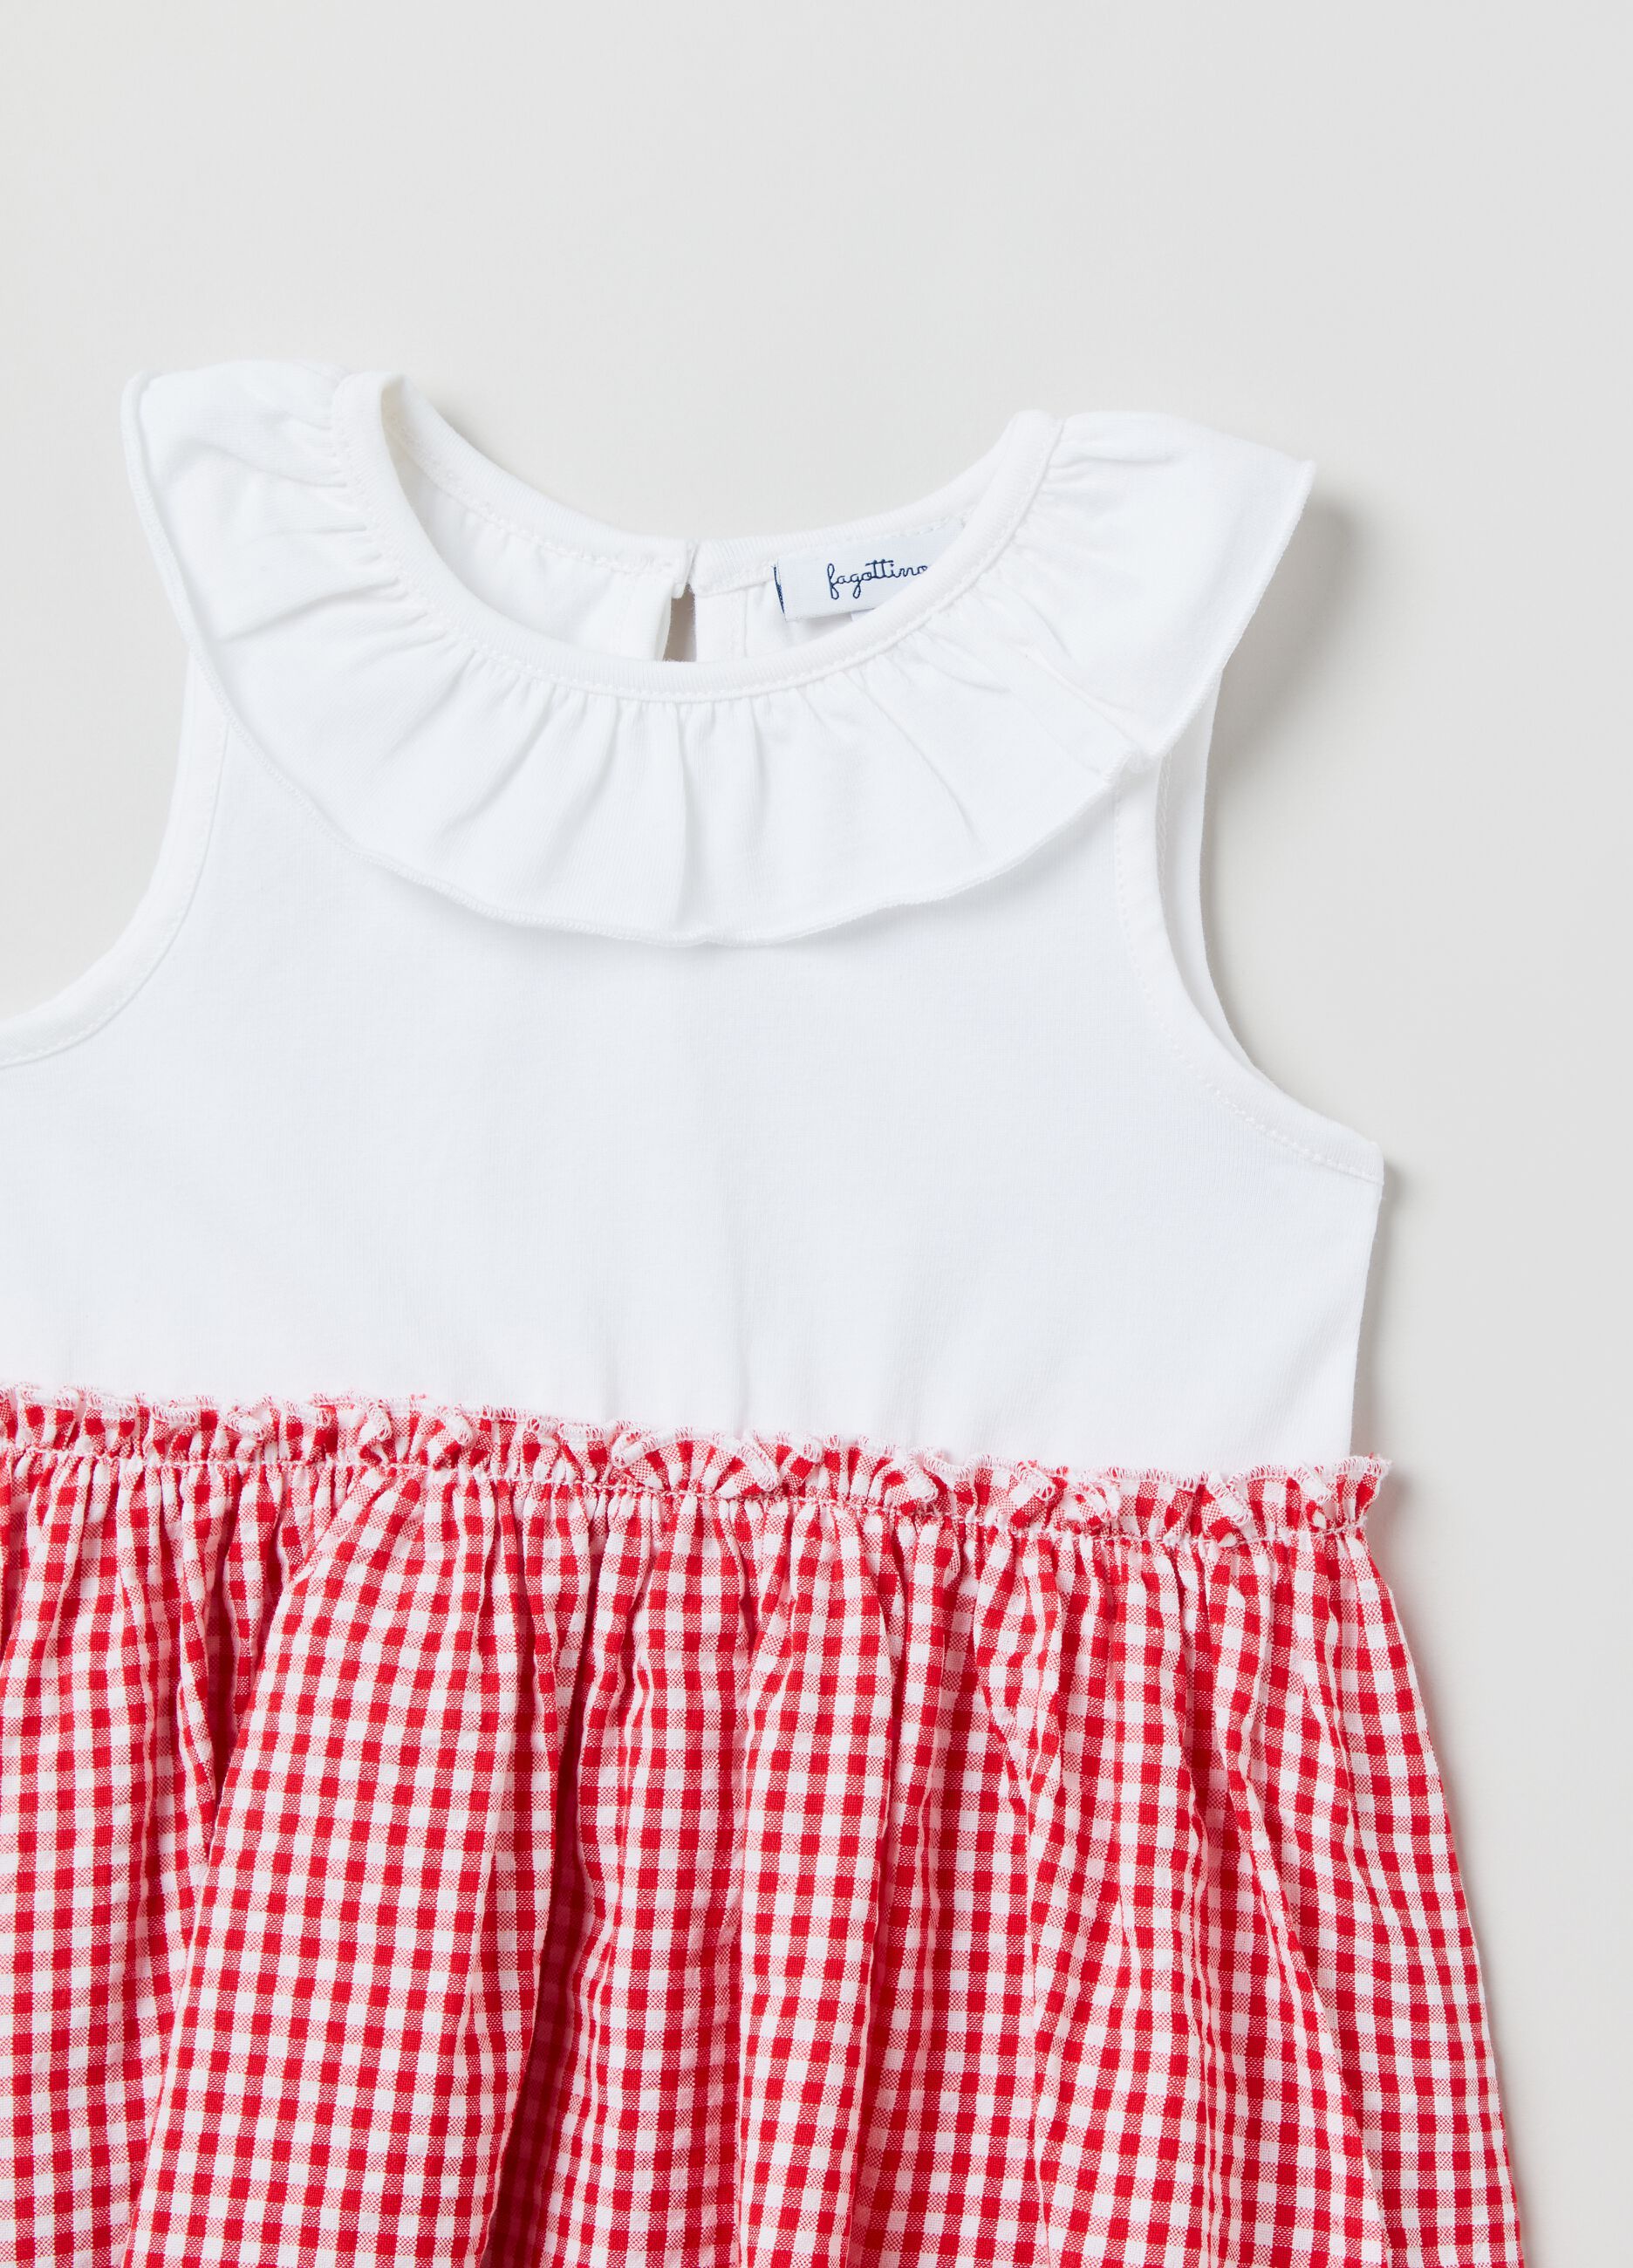 Dress with yarn-dyed gingham pattern